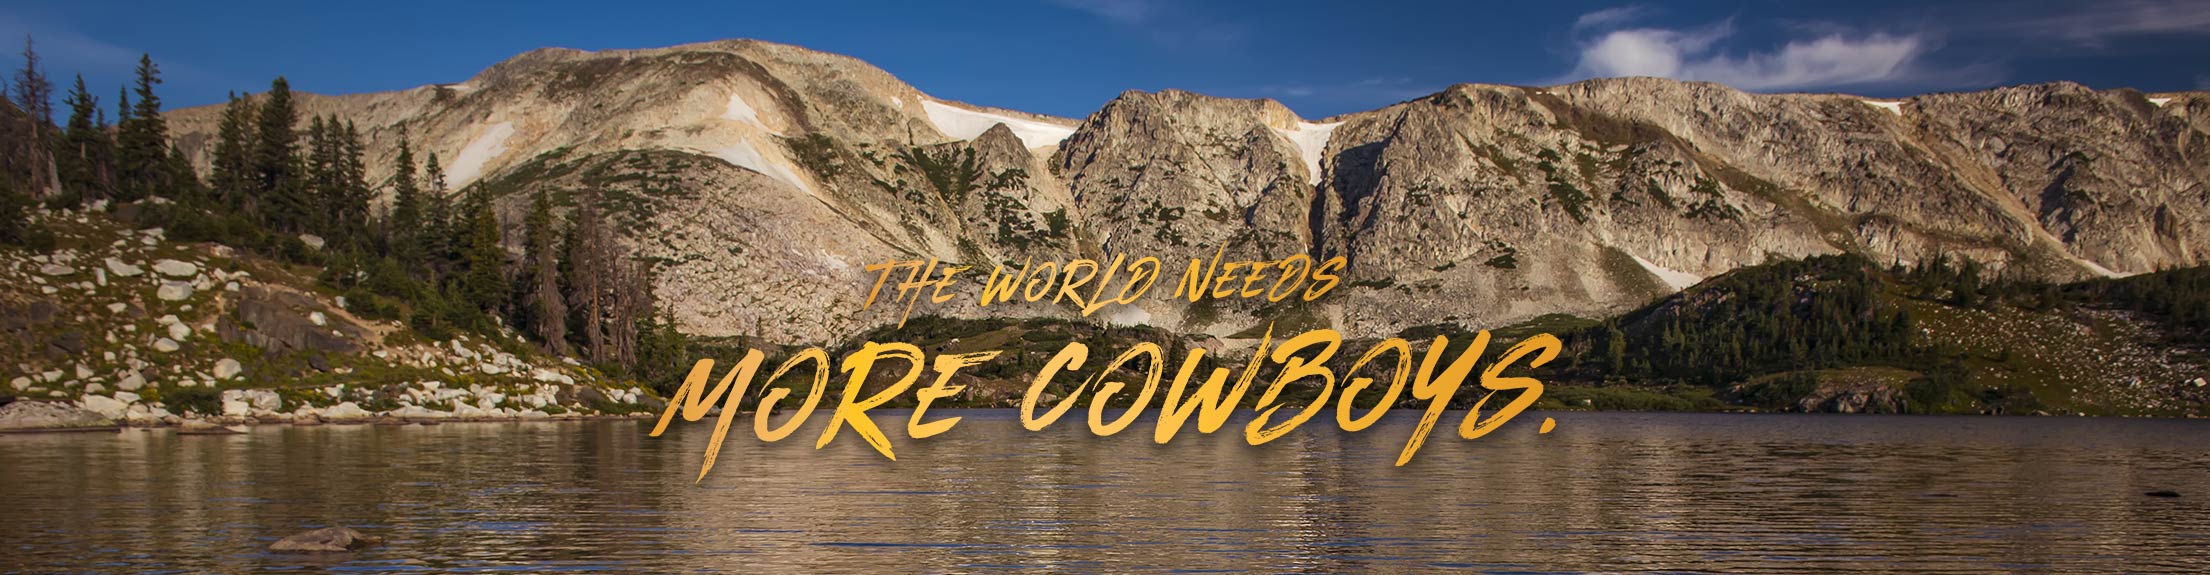 The World Needs More Cowboys over a scenic mountain photo